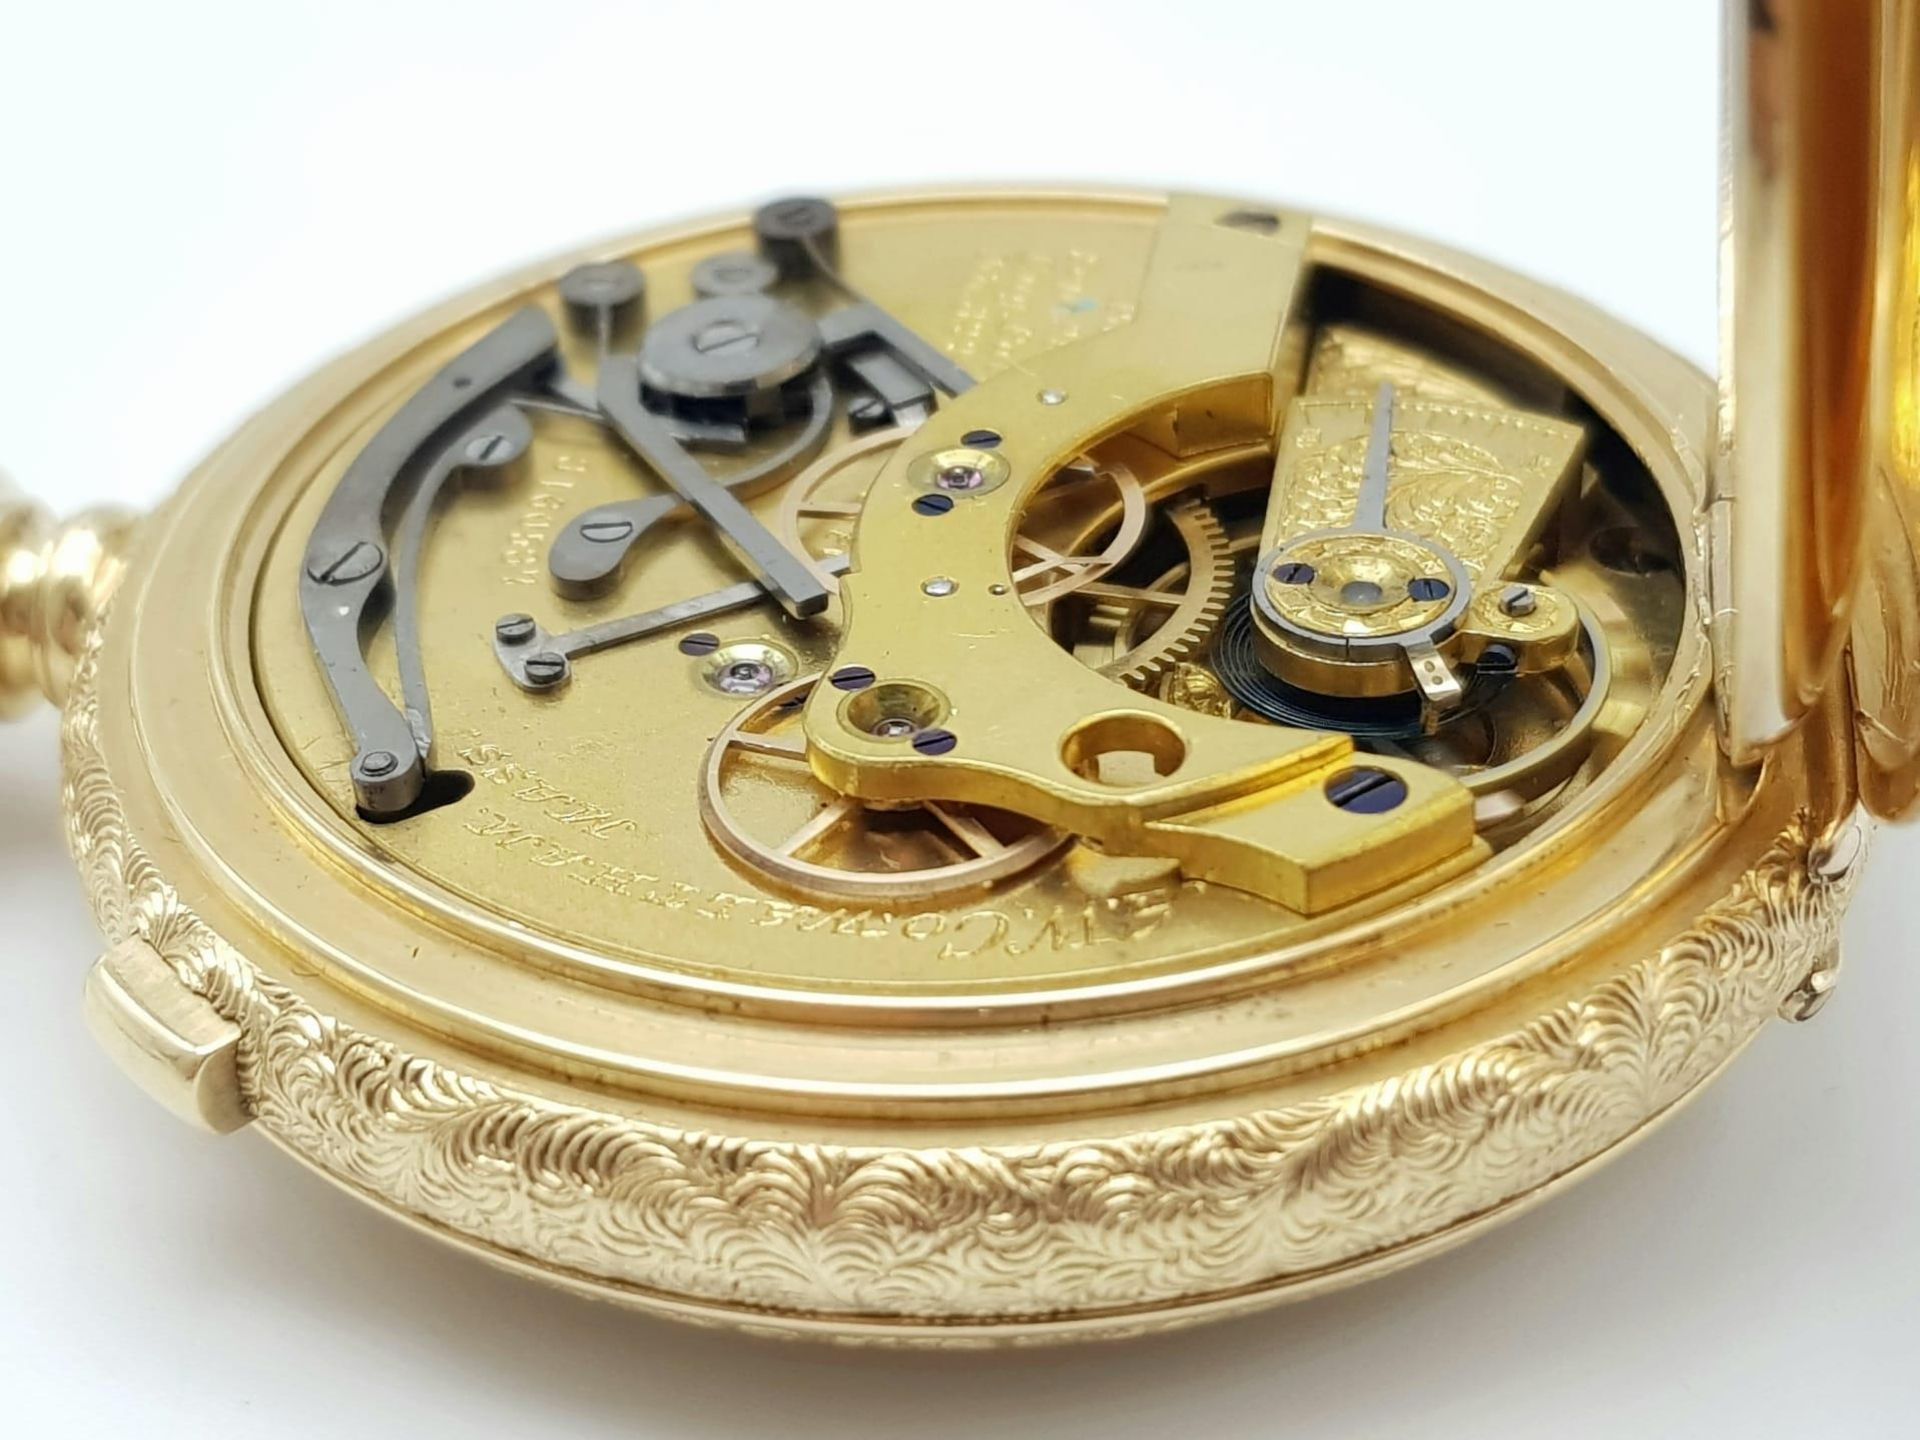 An Antique Waltham 18K Gold Full Hunter Pocket Watch. The case is ornately decorated in a floral - Bild 9 aus 13